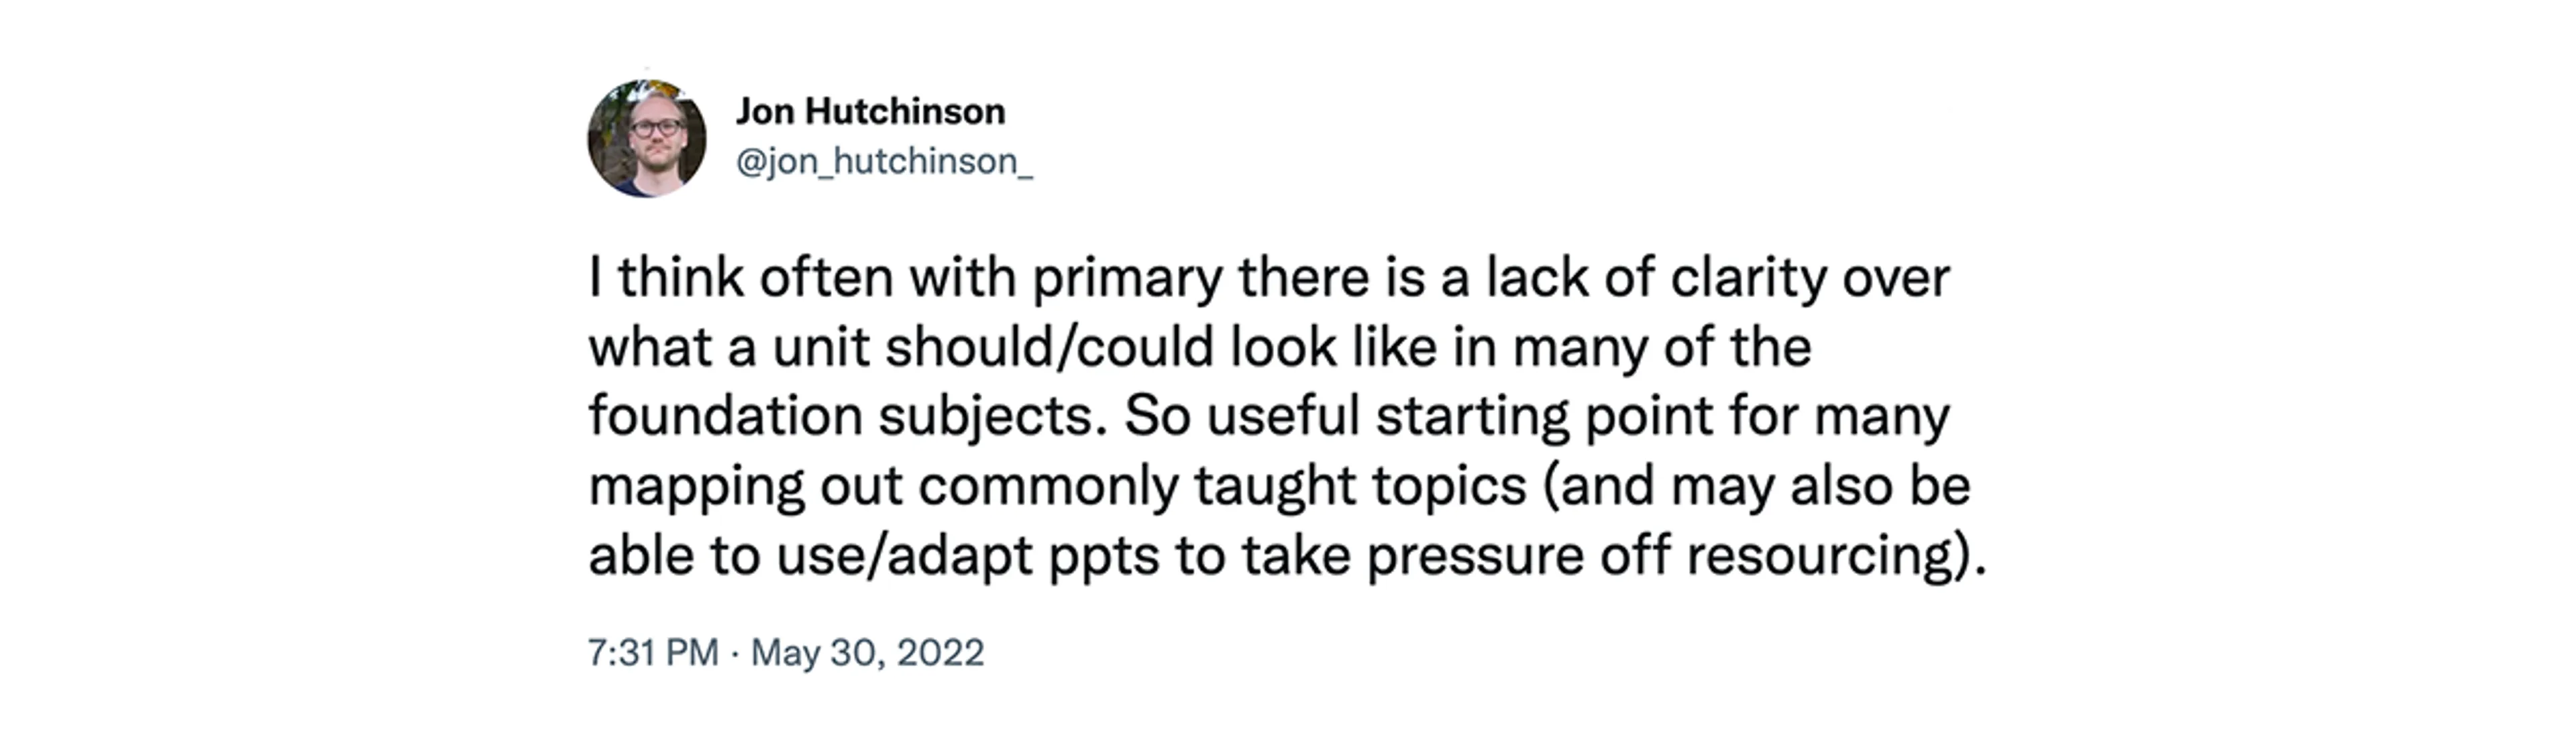 Screenshot of tweet from John Hutchinson at 7:31pm, May 30, 2022 saying "I think often with primary there is a lack of clarity over what a unit should/could look like in many of the foundation subjects. So useful starting point for many mapping out commonly taught topics (and may also be able to use/adapt ppts to take pressure off resourcing)."